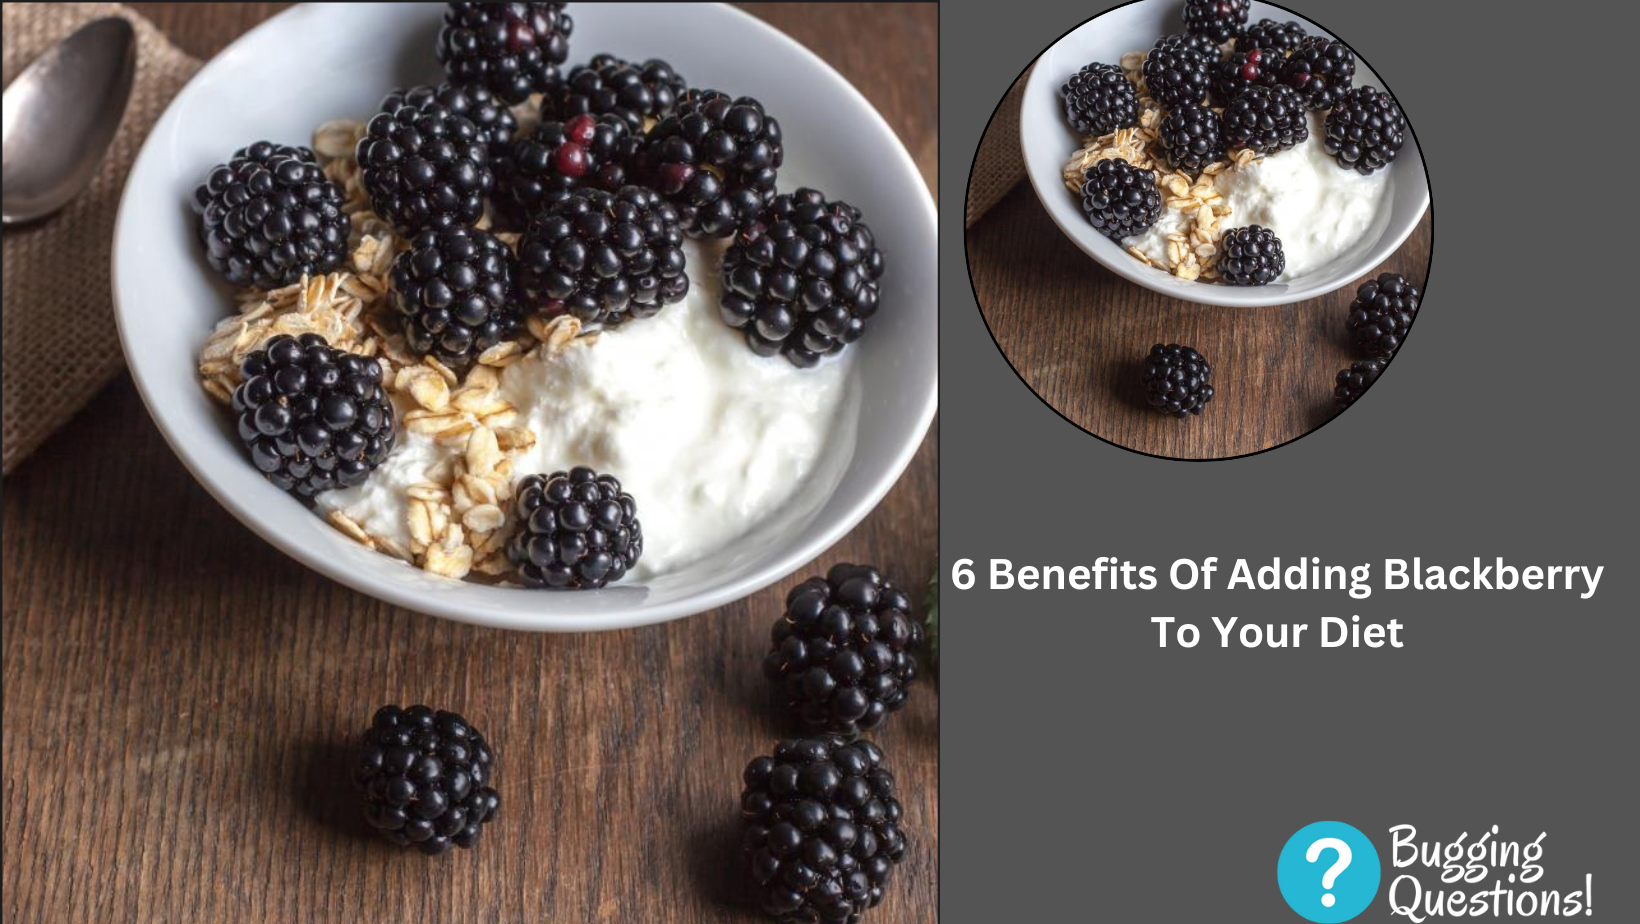 Benefits Of Adding Blackberry To Your Diet